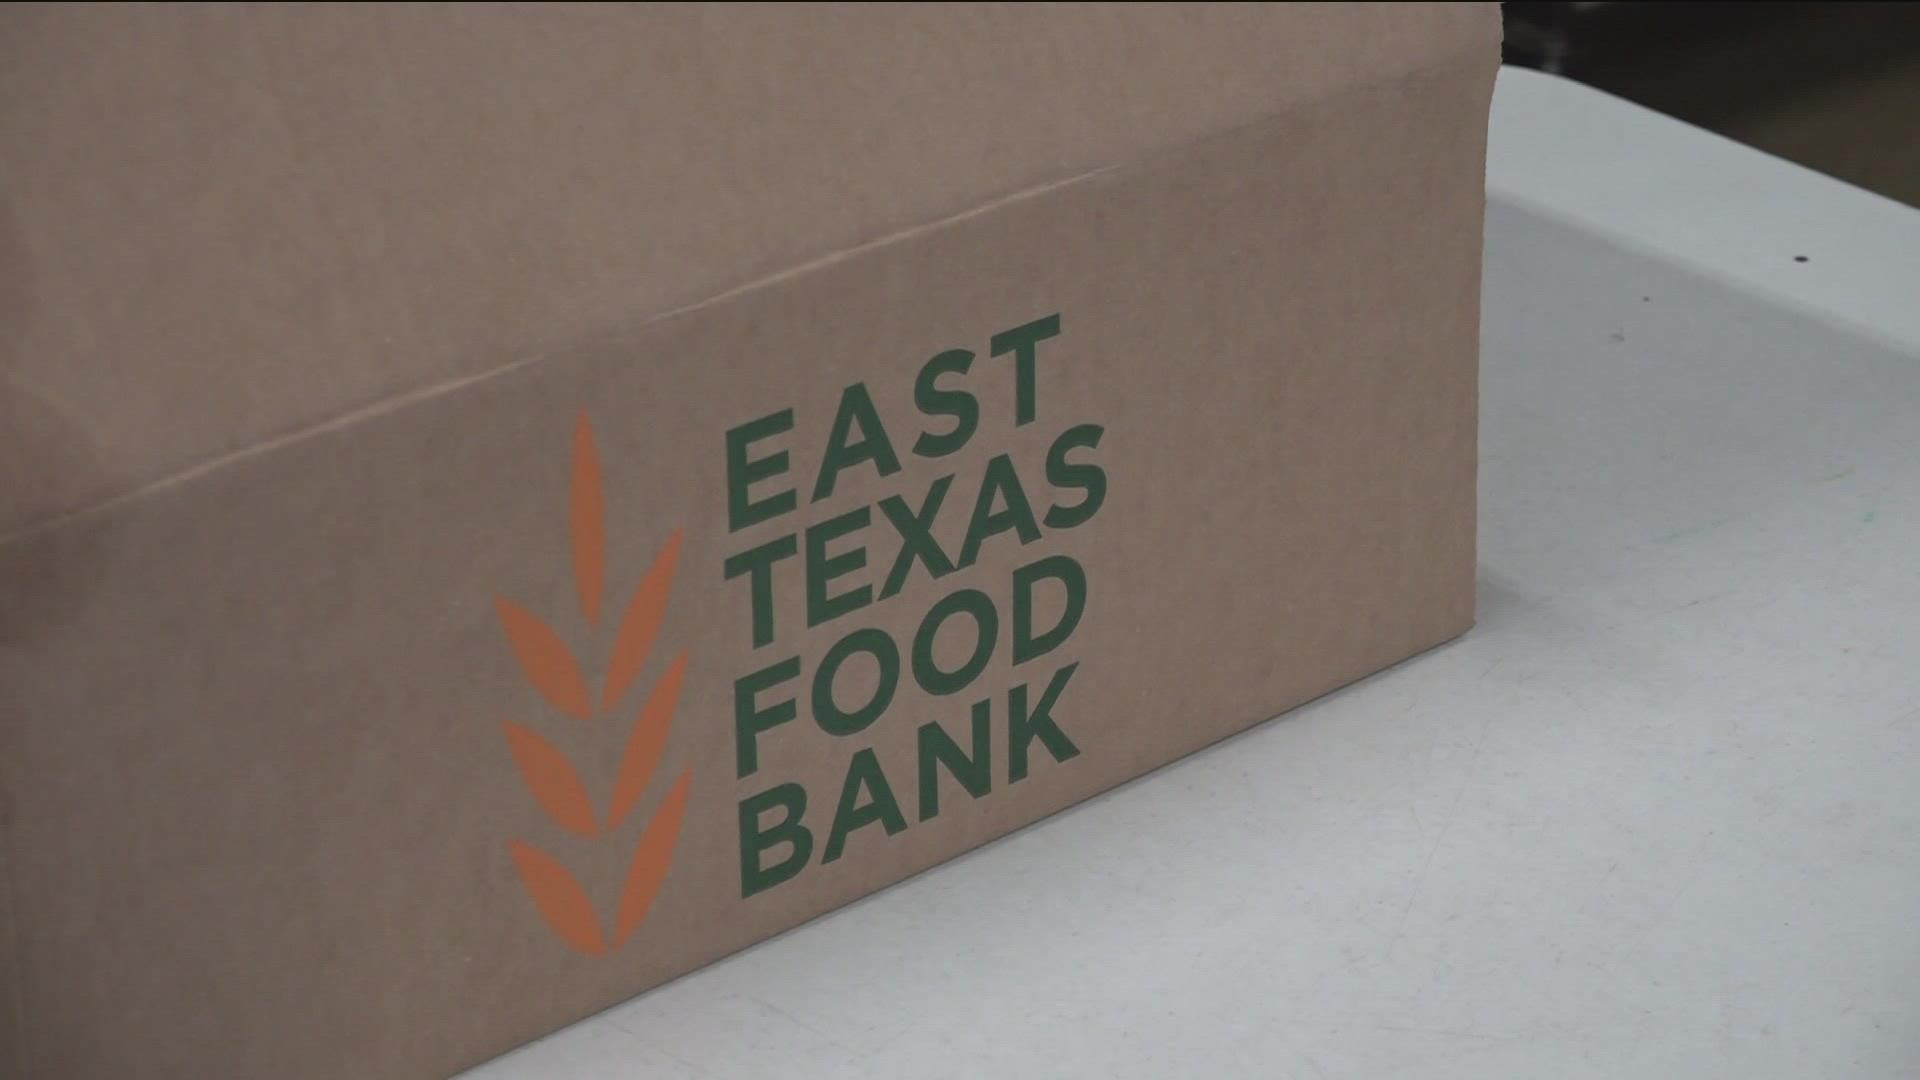 Many kids risk going hungry over the summer while they're out of school and the East Texas Food Bank is helping fill that gap.